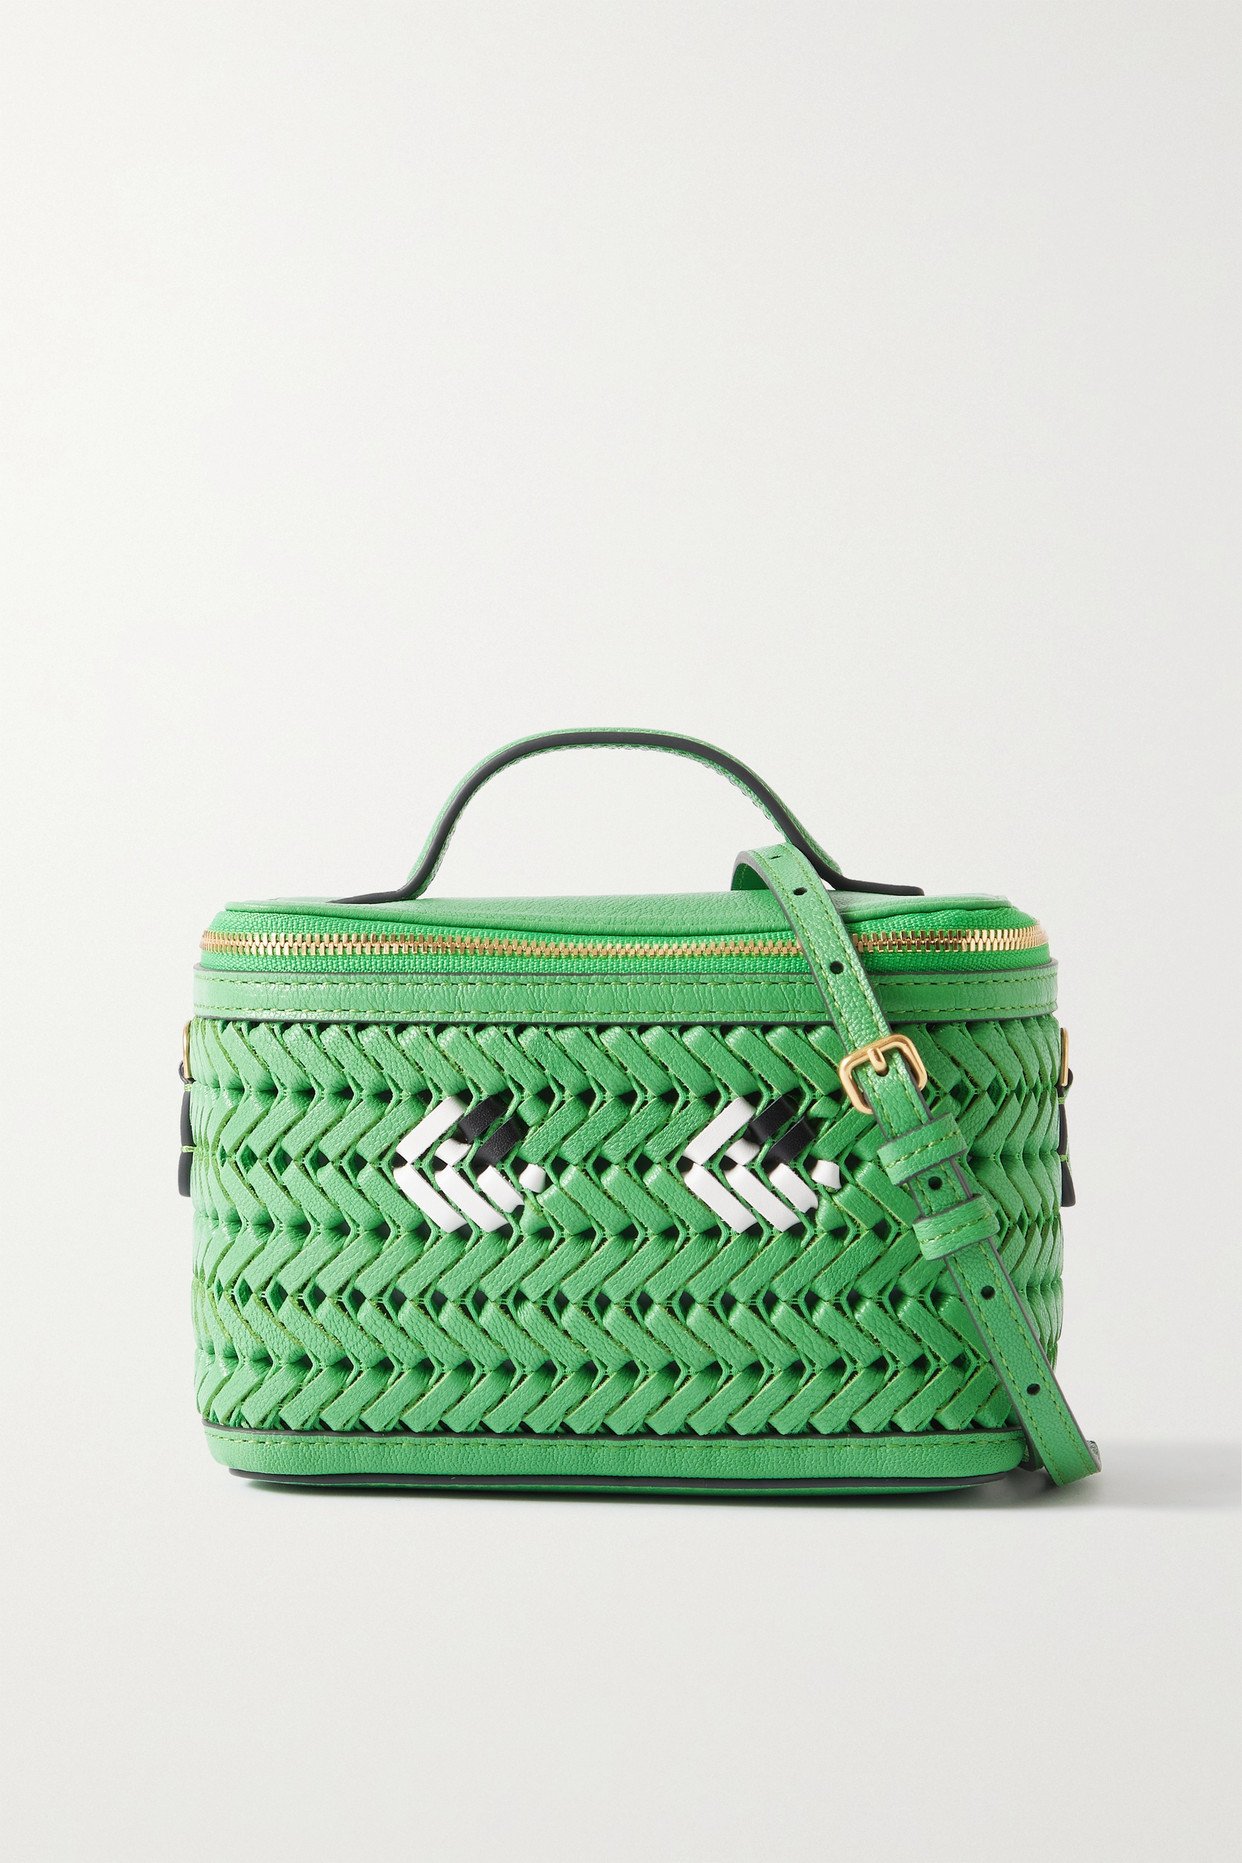 Anya Hindmarch Neeson tasseled woven leather tote - Women - Green Shoulder Bags